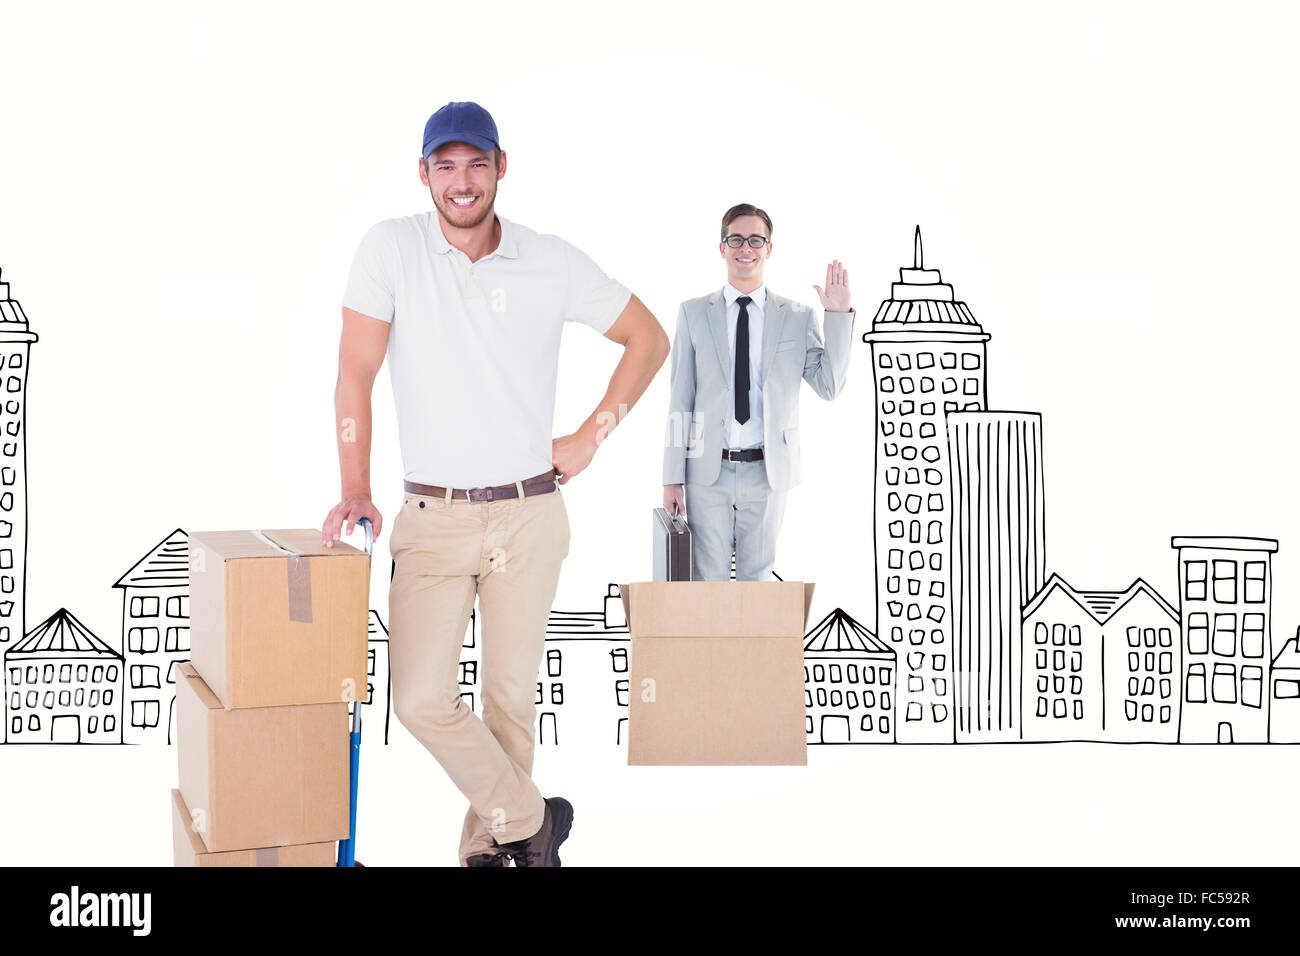 Composite image of happy delivery man leaning on trolley of boxes Stock Photo